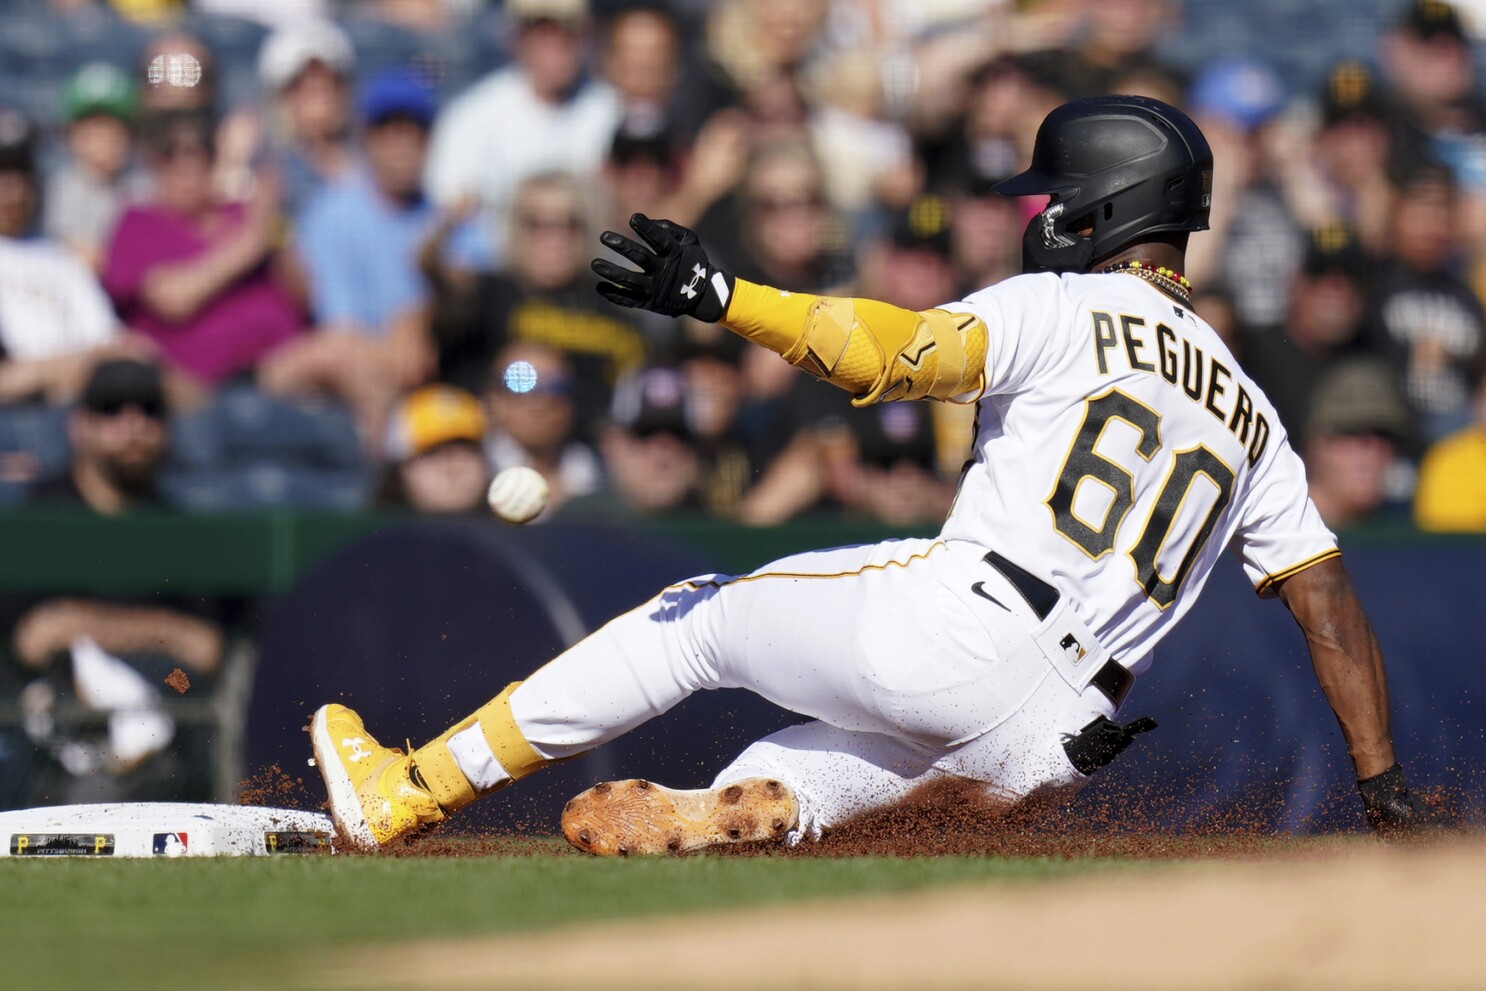 How to Watch the Marlins vs. Pirates Game: Streaming & TV Info